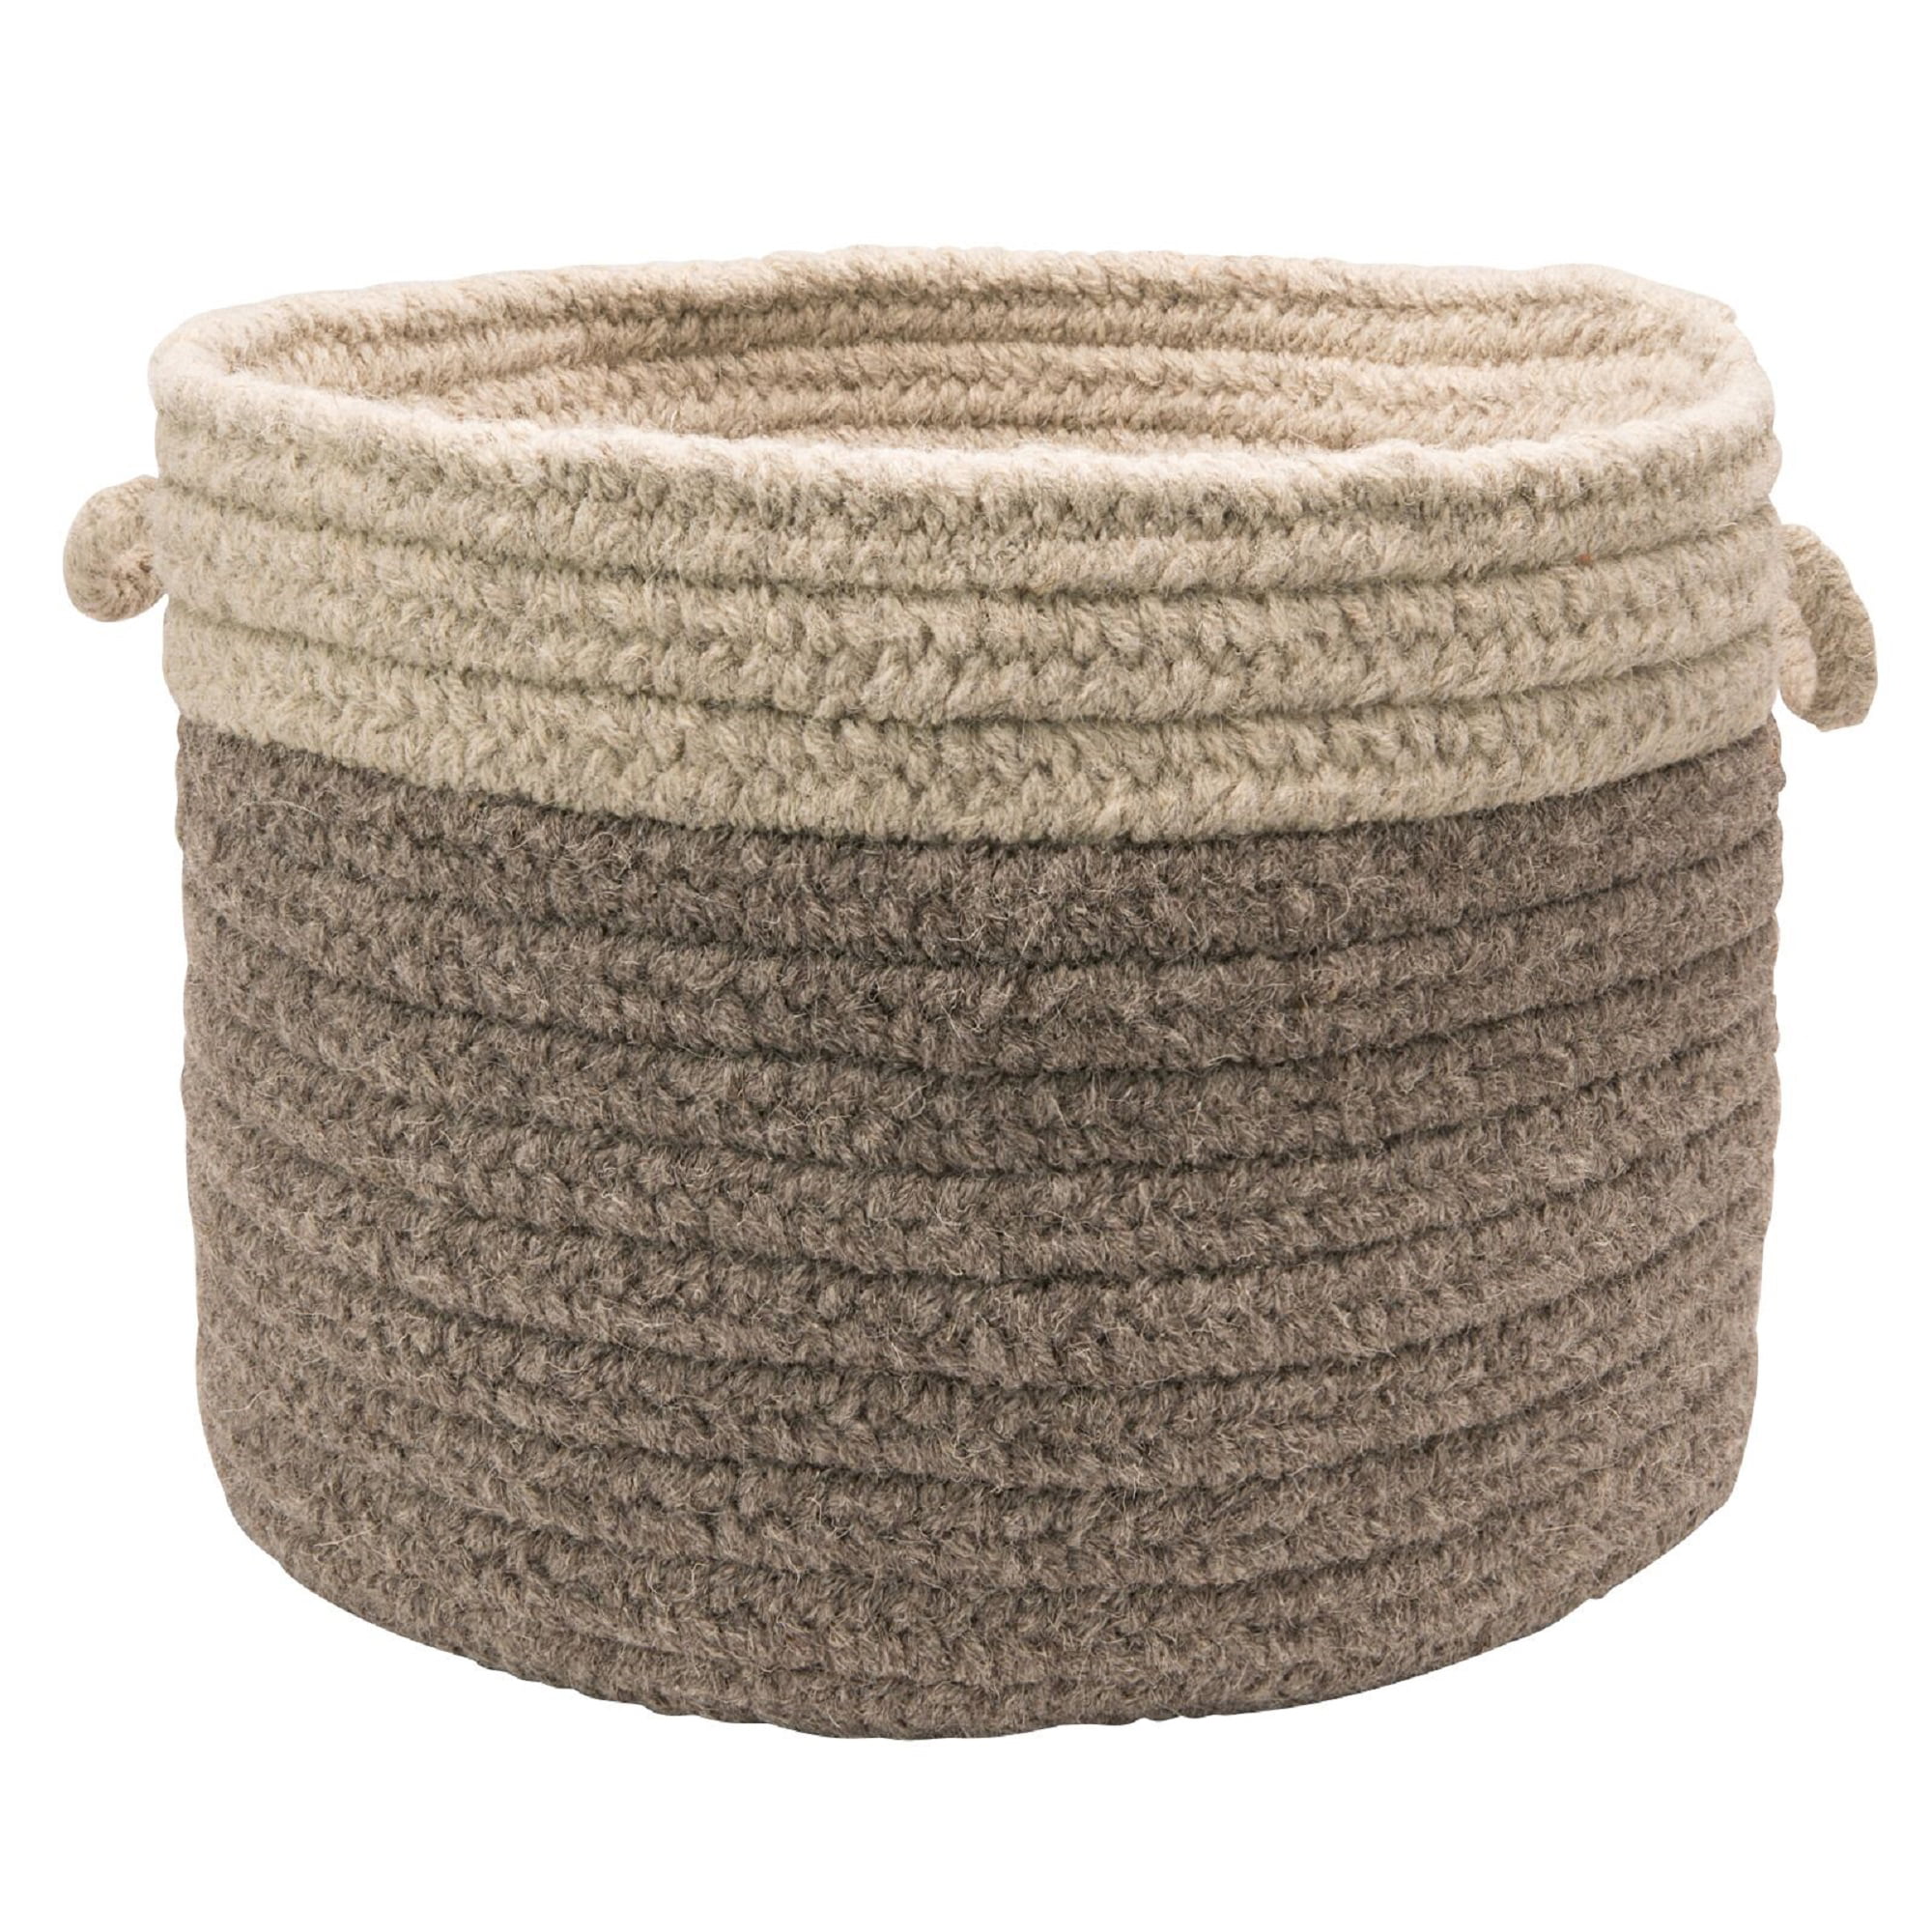 Picture of Colonial Mills CN21A024X014 24 x 14 in. Chunky Natural Wool Dipped Basket, Dark Gray & Light Gray